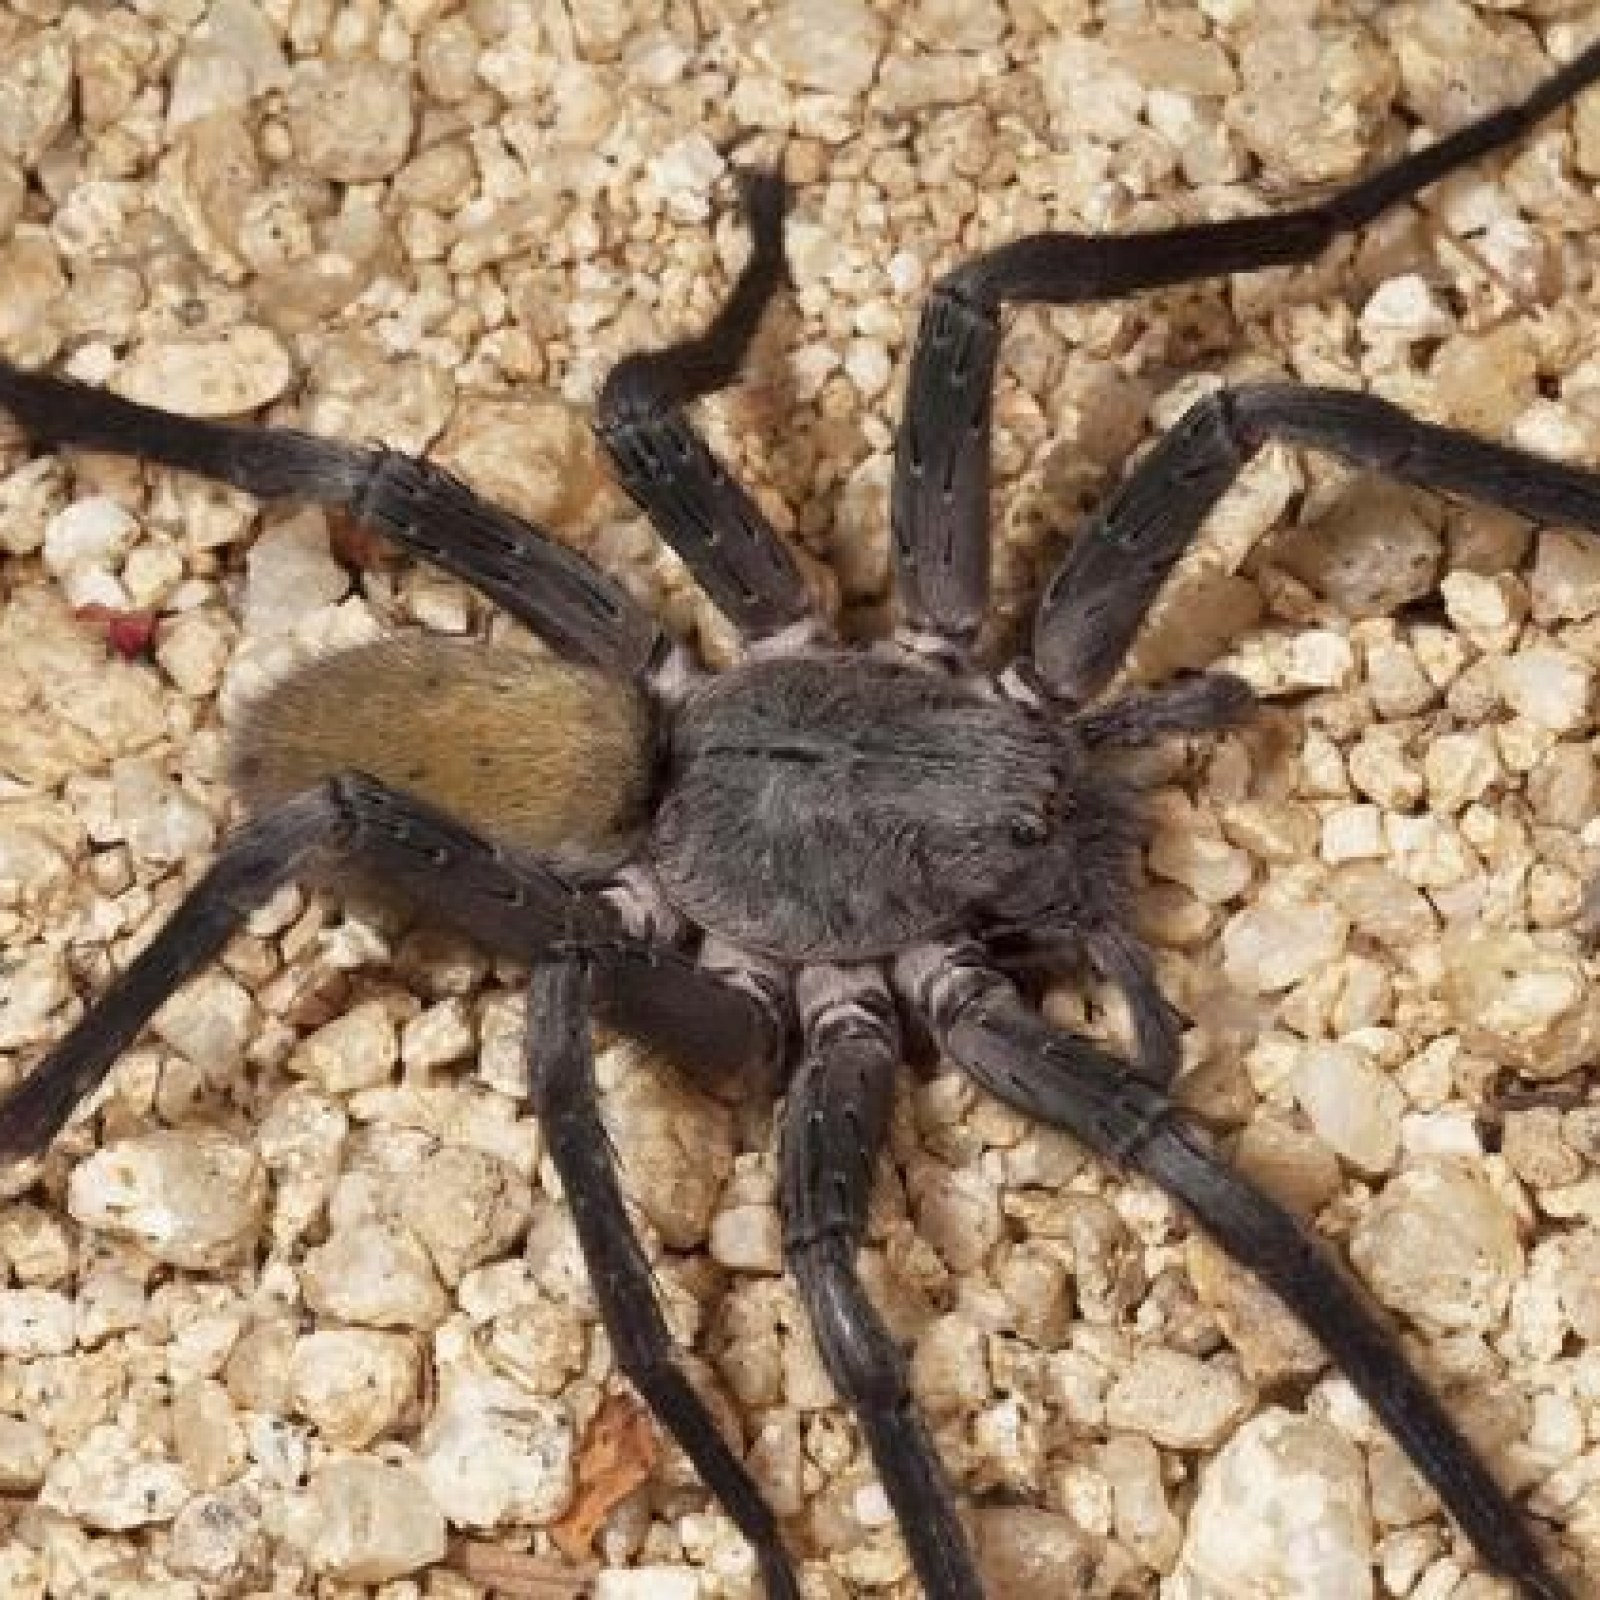 Meet the 1,000 Spider Species Living in Caves. Some Feed on Fish and Frogs